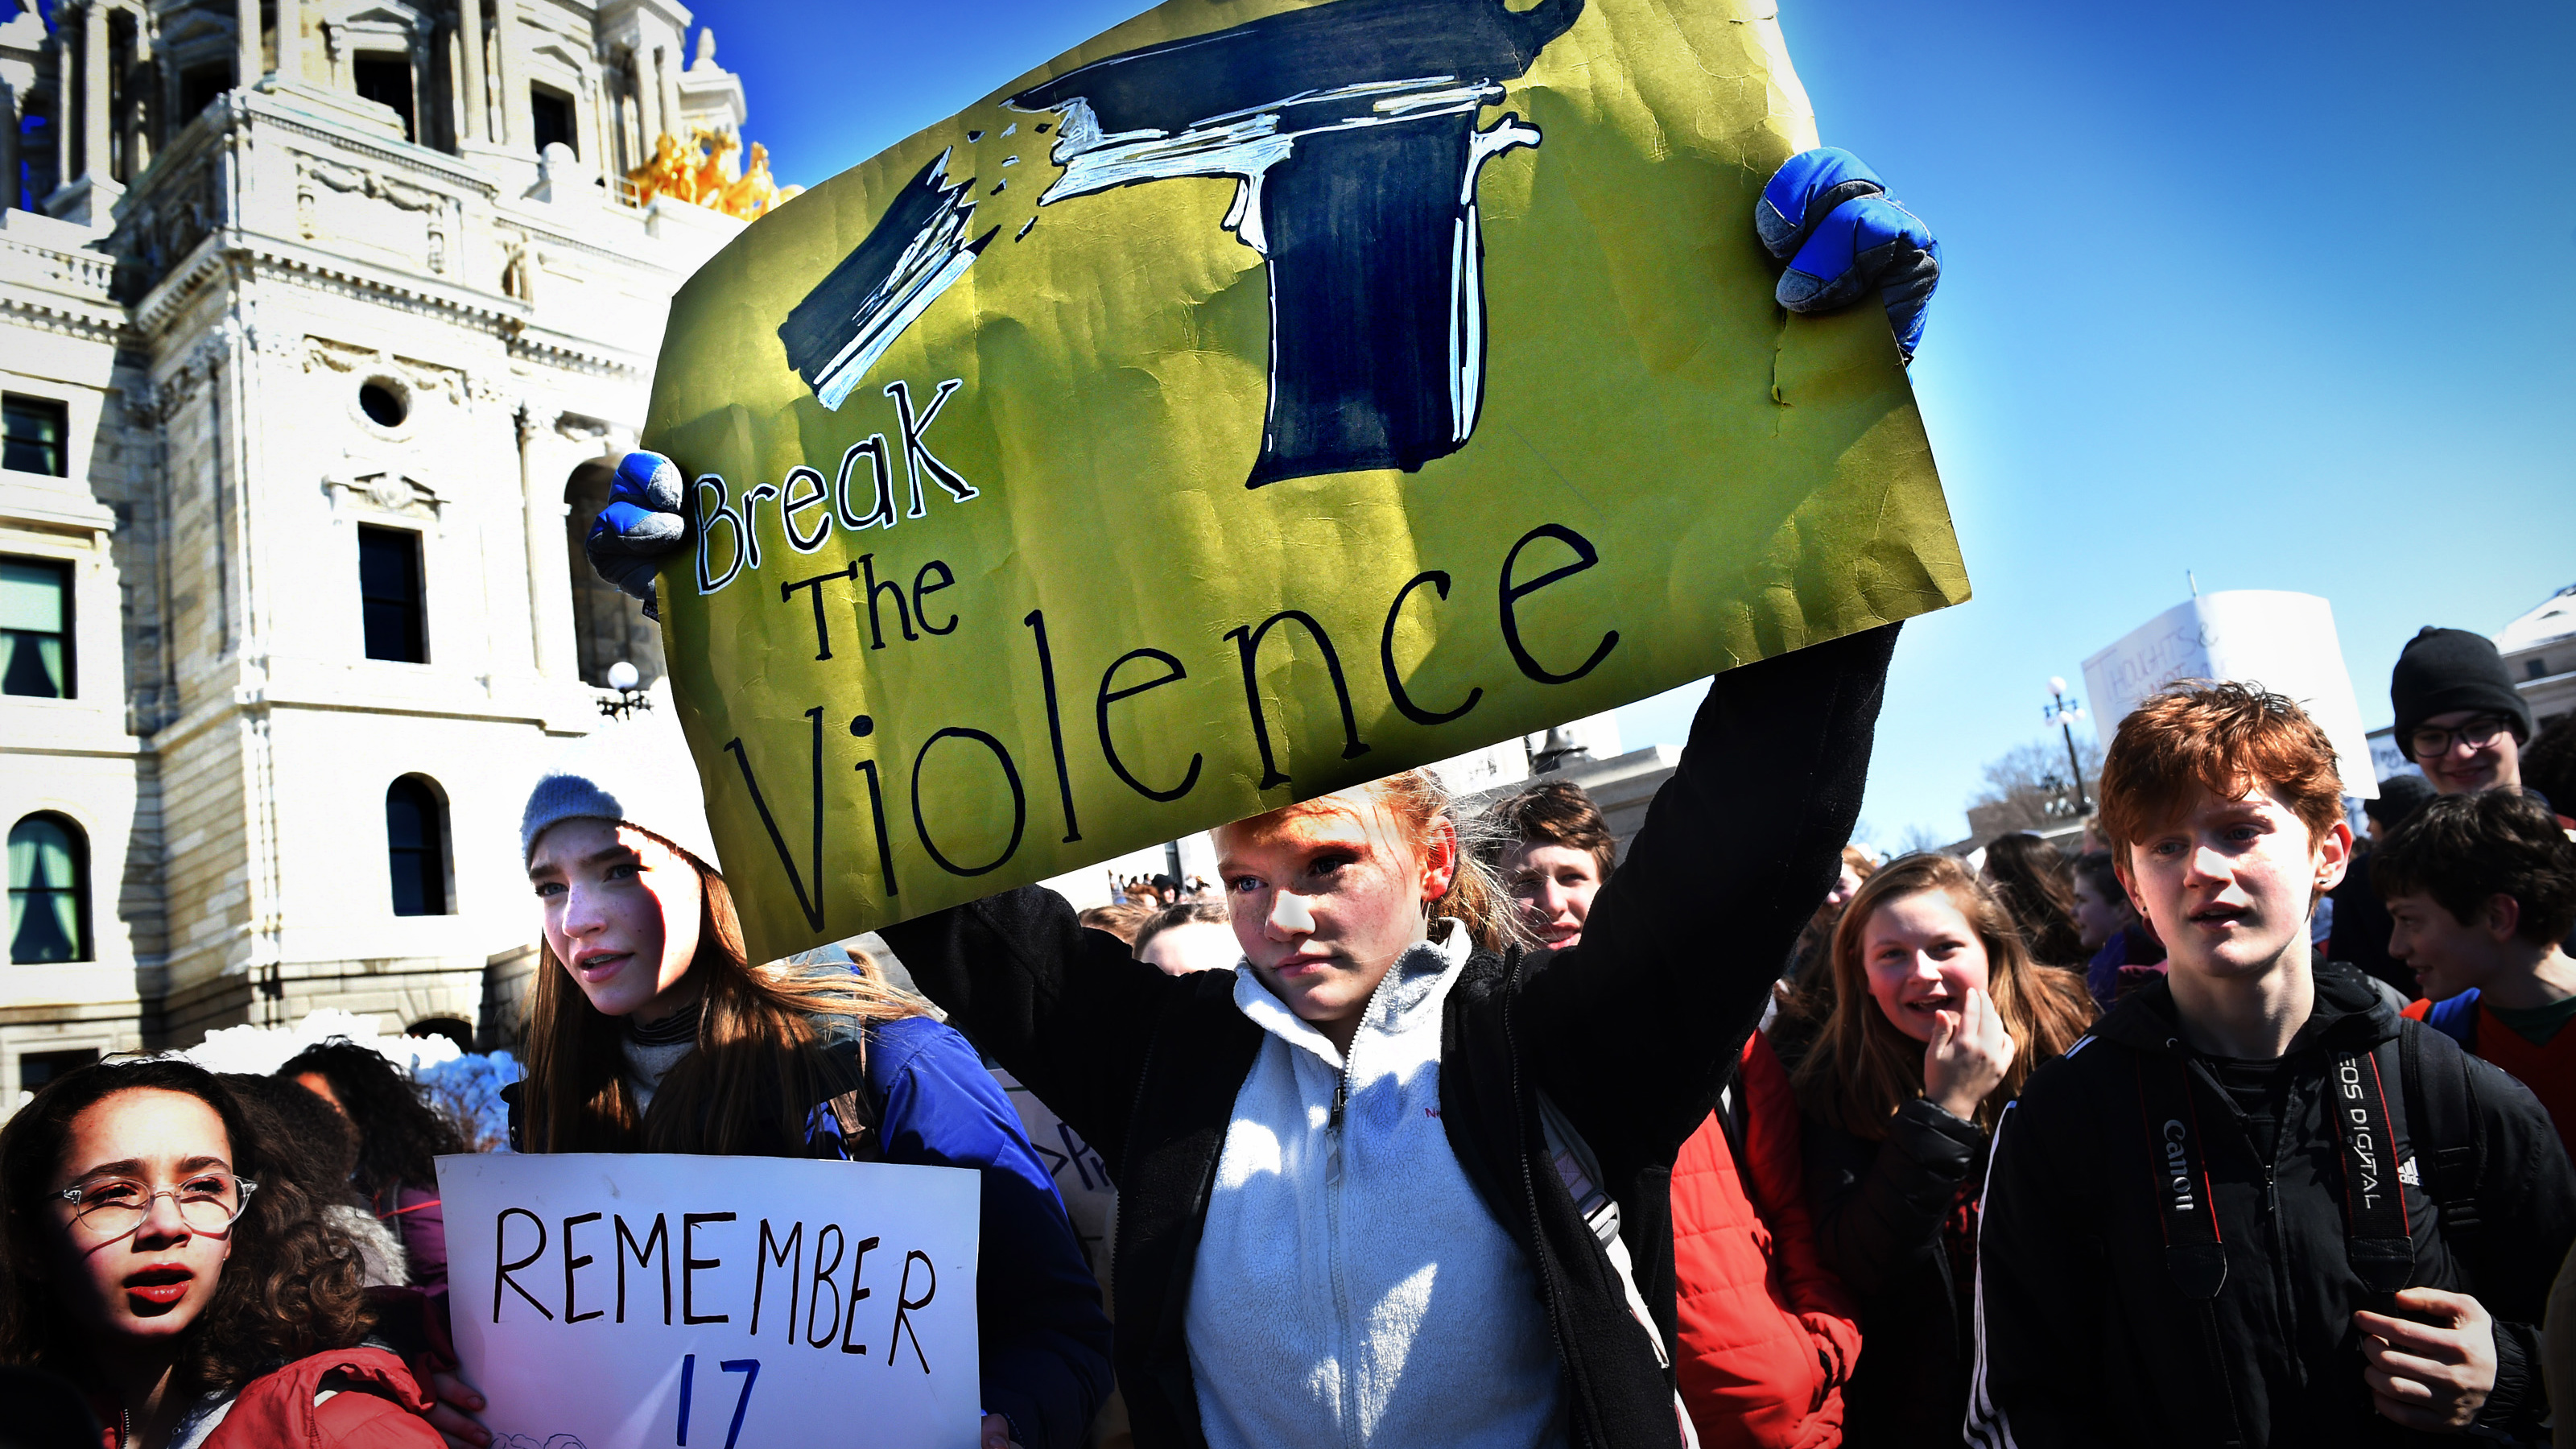 st paul students want gun control and they want it now